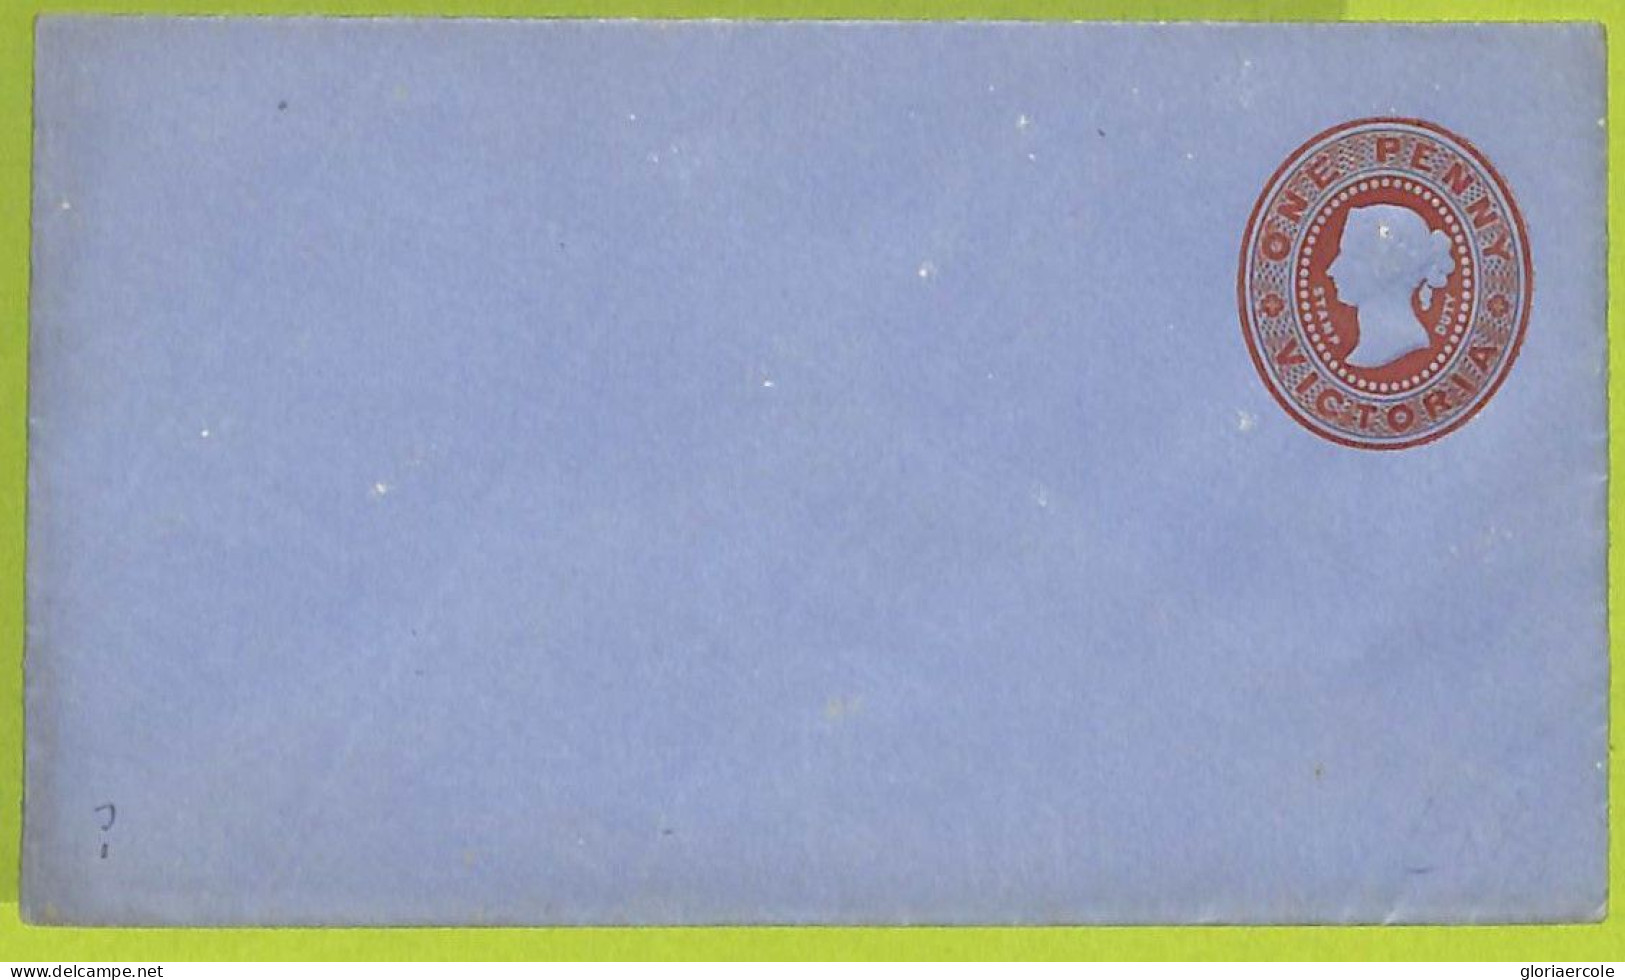 40206 - VICTORIA - Postal History - STATIONERY COVER Printed To Order BLUE LAID PAPER 1 P - 136*78 - Storia Postale